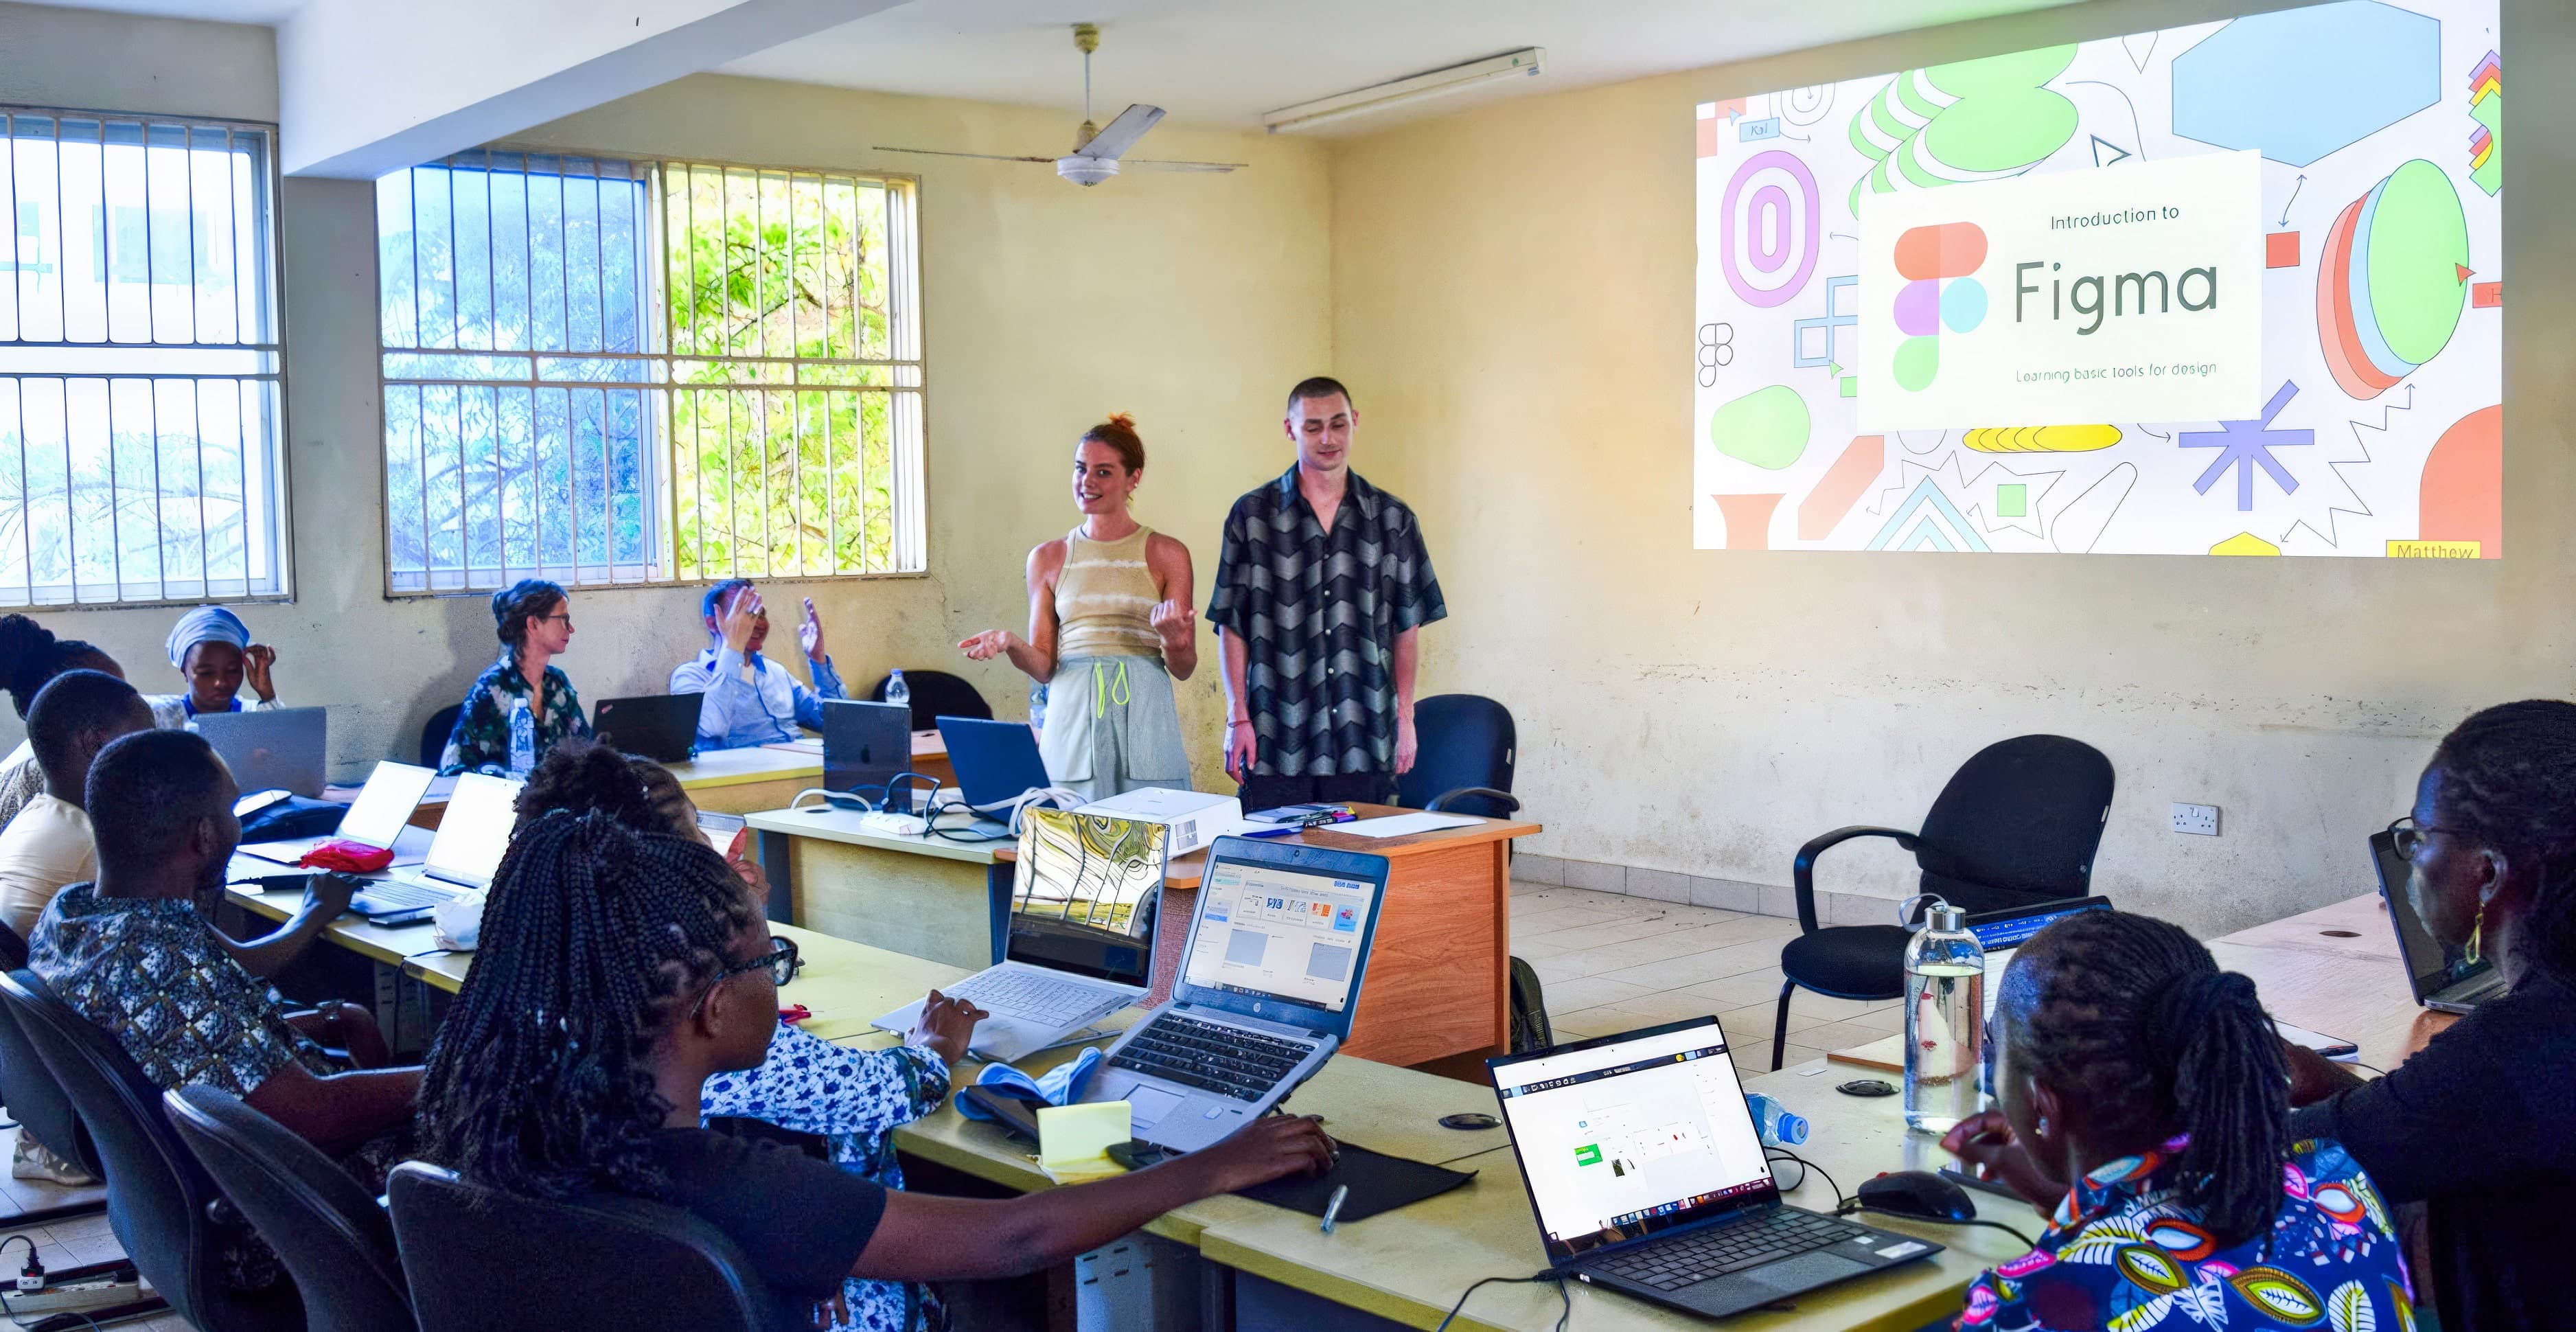 Olivia and Lukas discussing a Figma tutorial with students in a classroom at Pwani University, Kilifi, Kenya